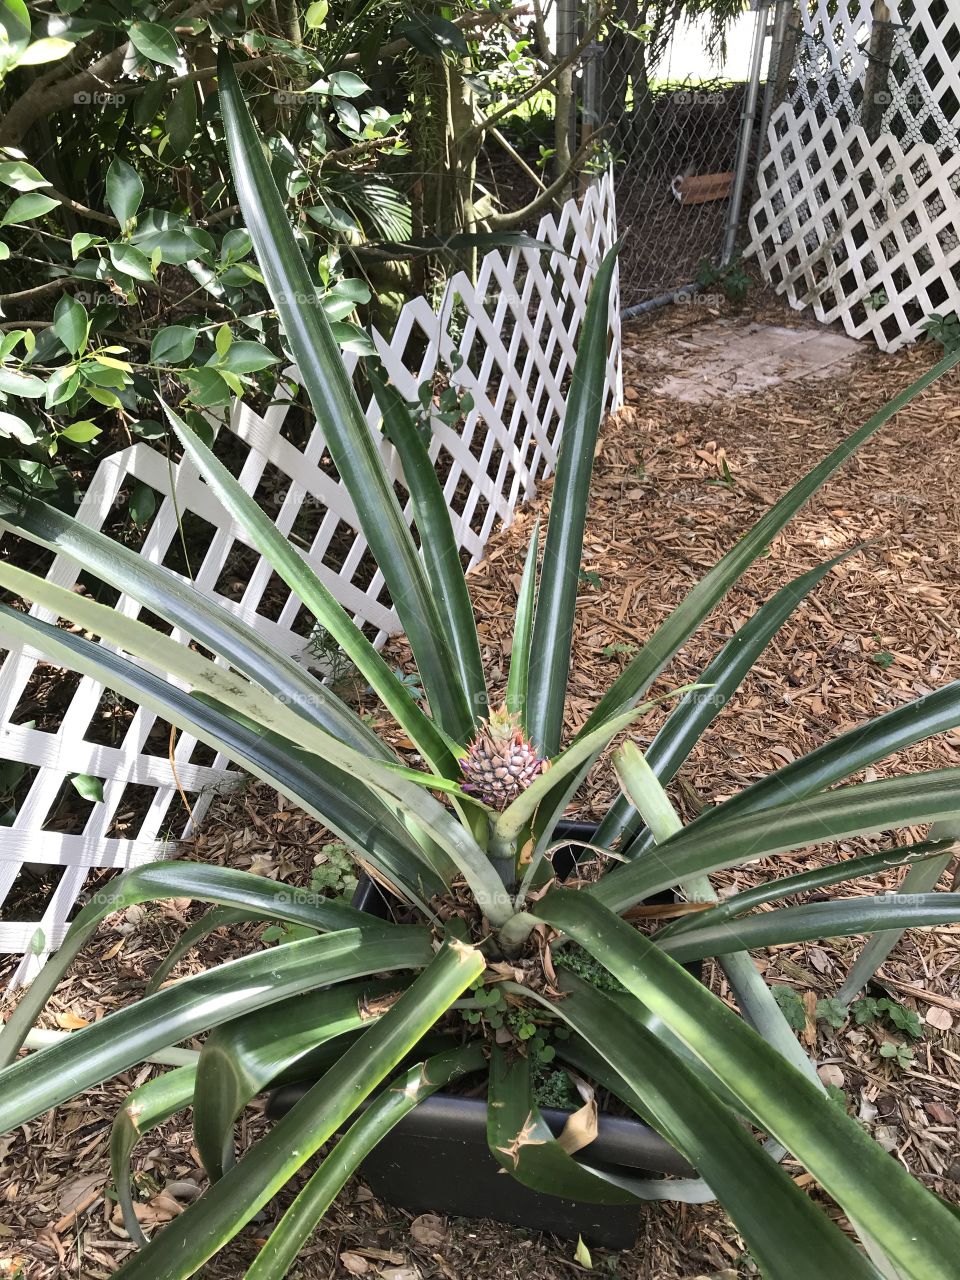 Home grown pineapples are so good!